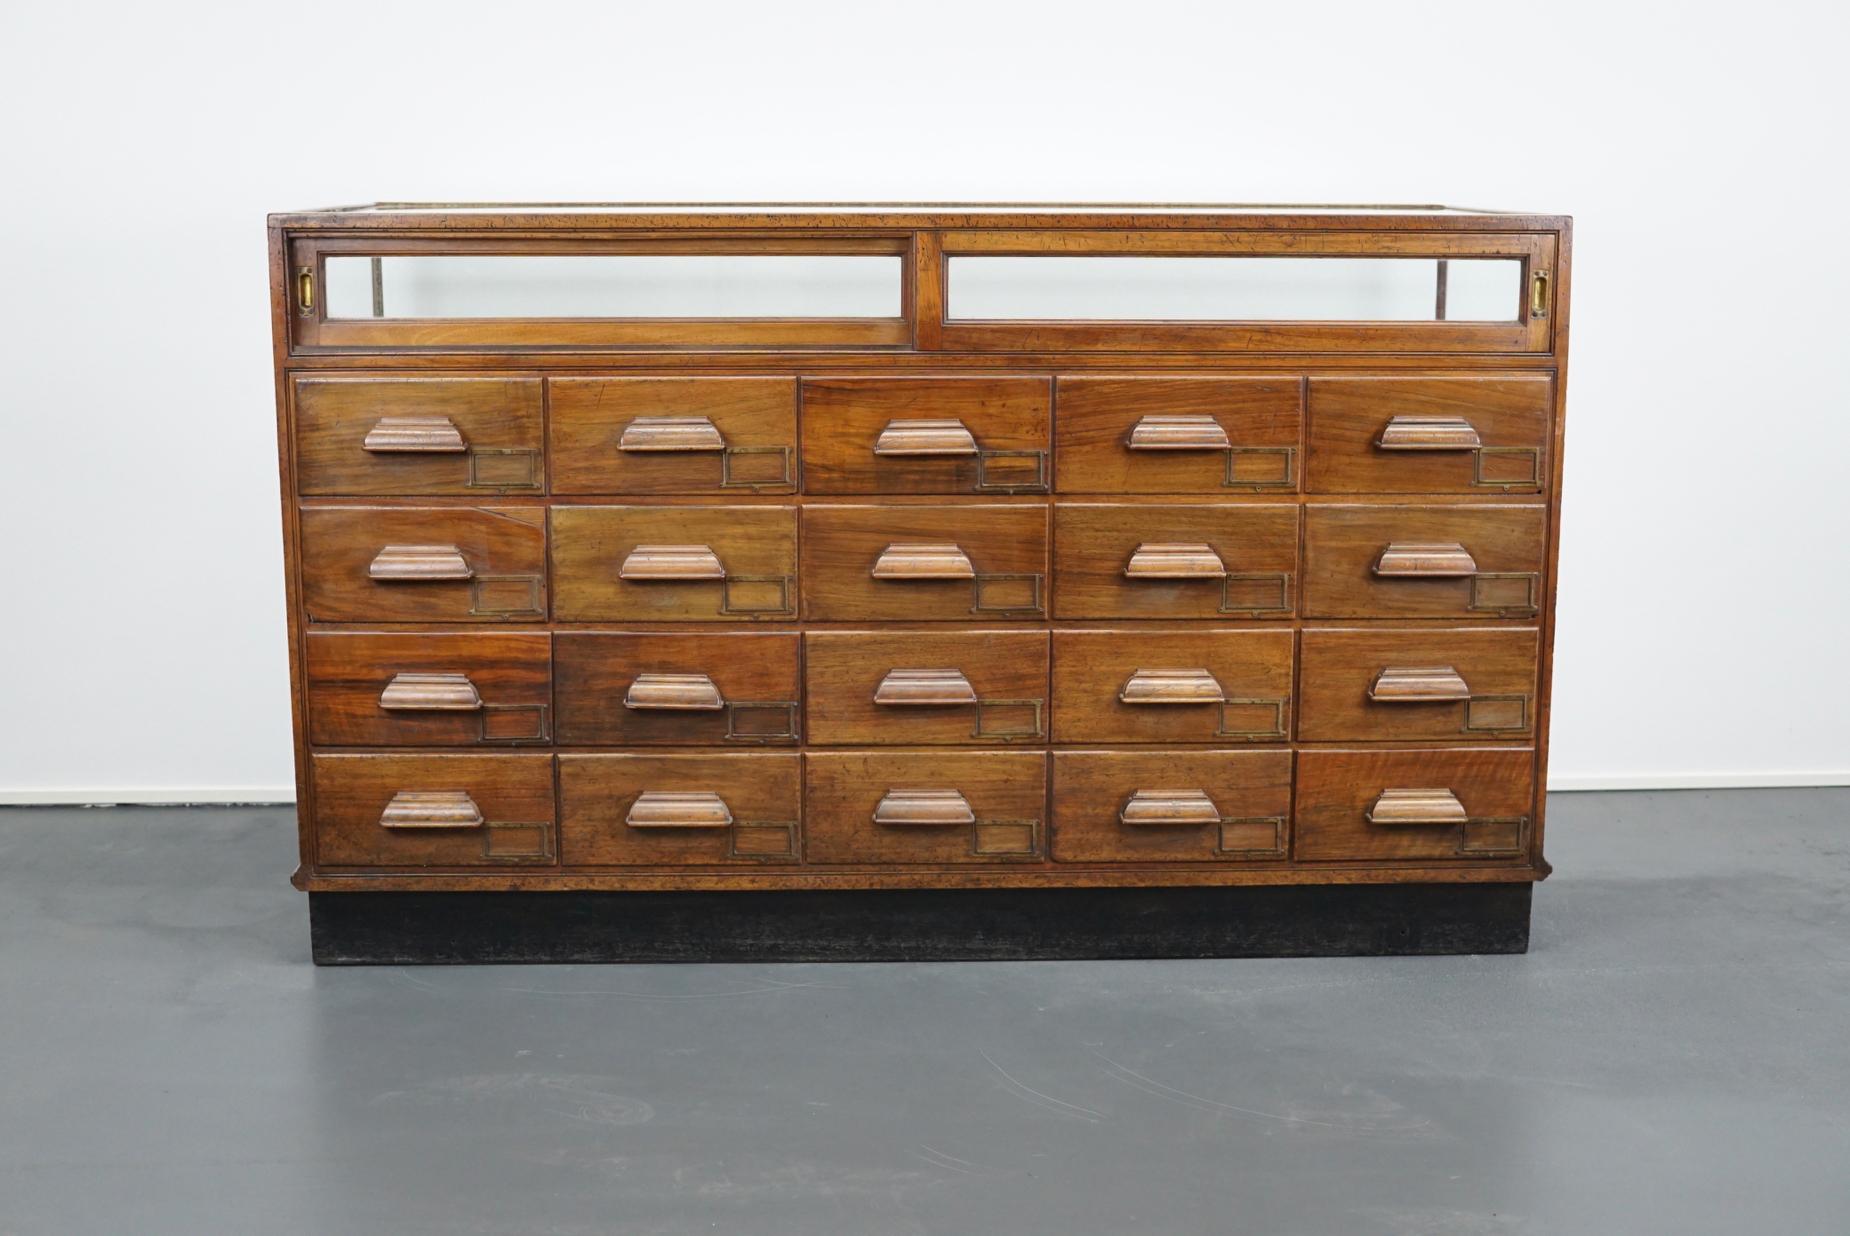 This vintage mahogany haberdashery shop counter dates from the 1930s and was made in England. It features a solid wooden frame and drawers in mahogany with wooden handles.
 